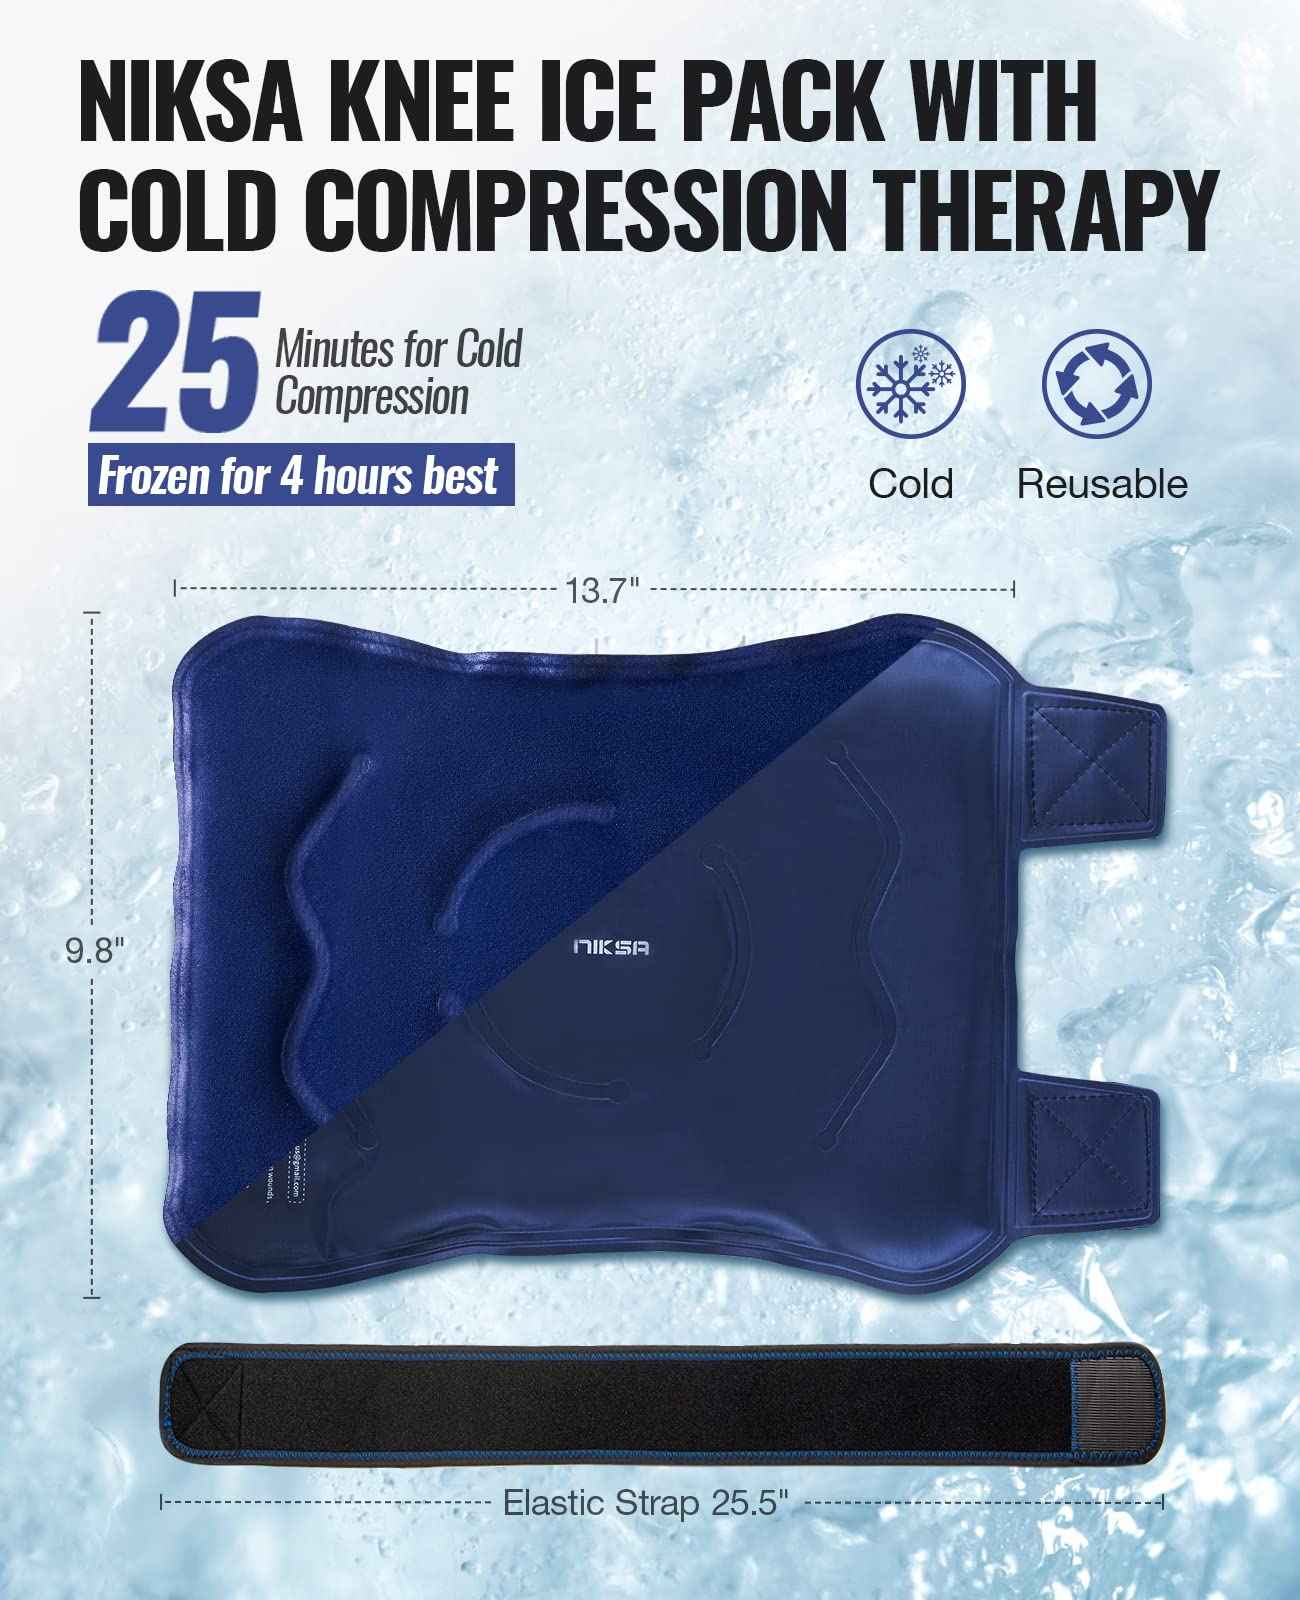 niksa ice pack with cold compression therapy